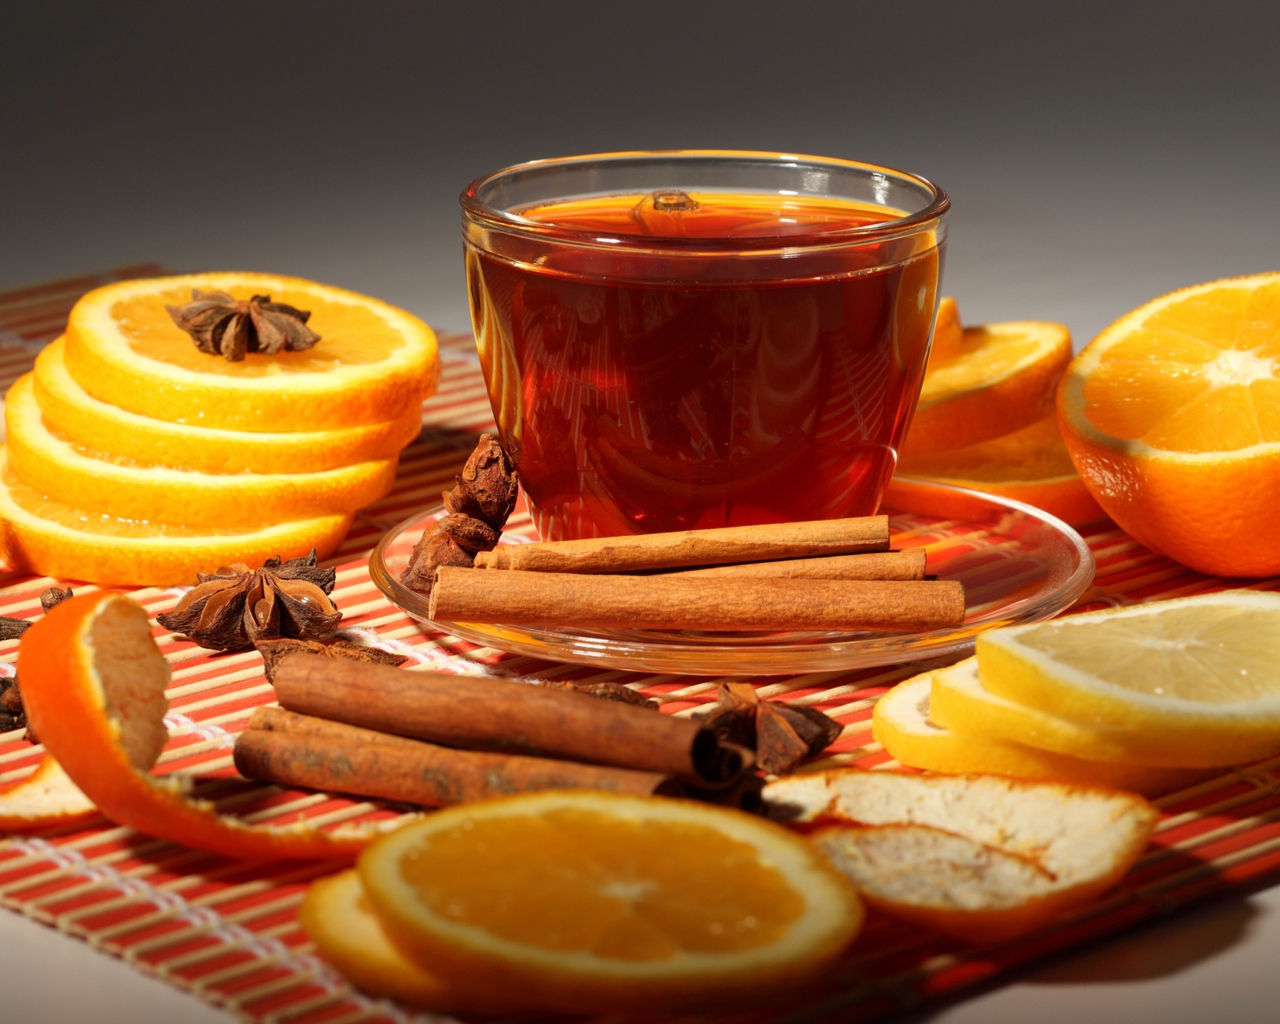 A cup of tea on the table with oranges, cinnamon and star anise